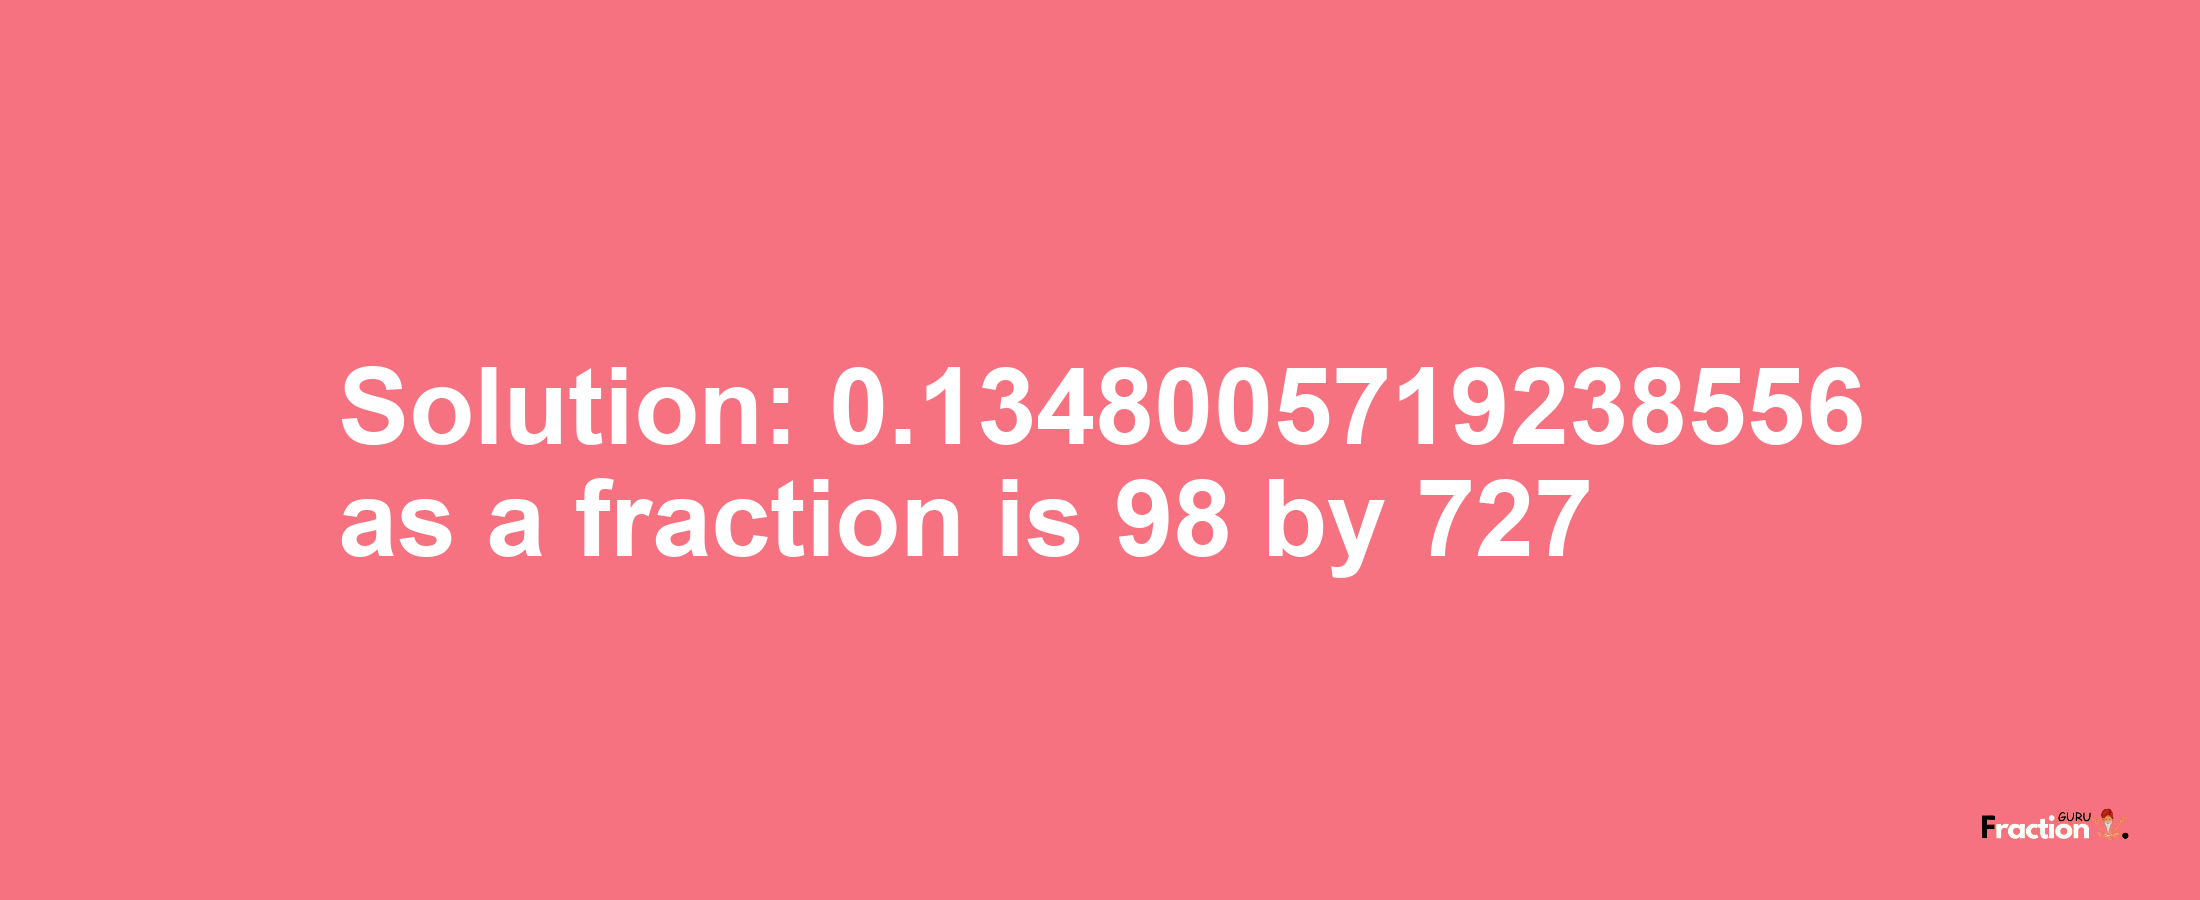 Solution:0.1348005719238556 as a fraction is 98/727